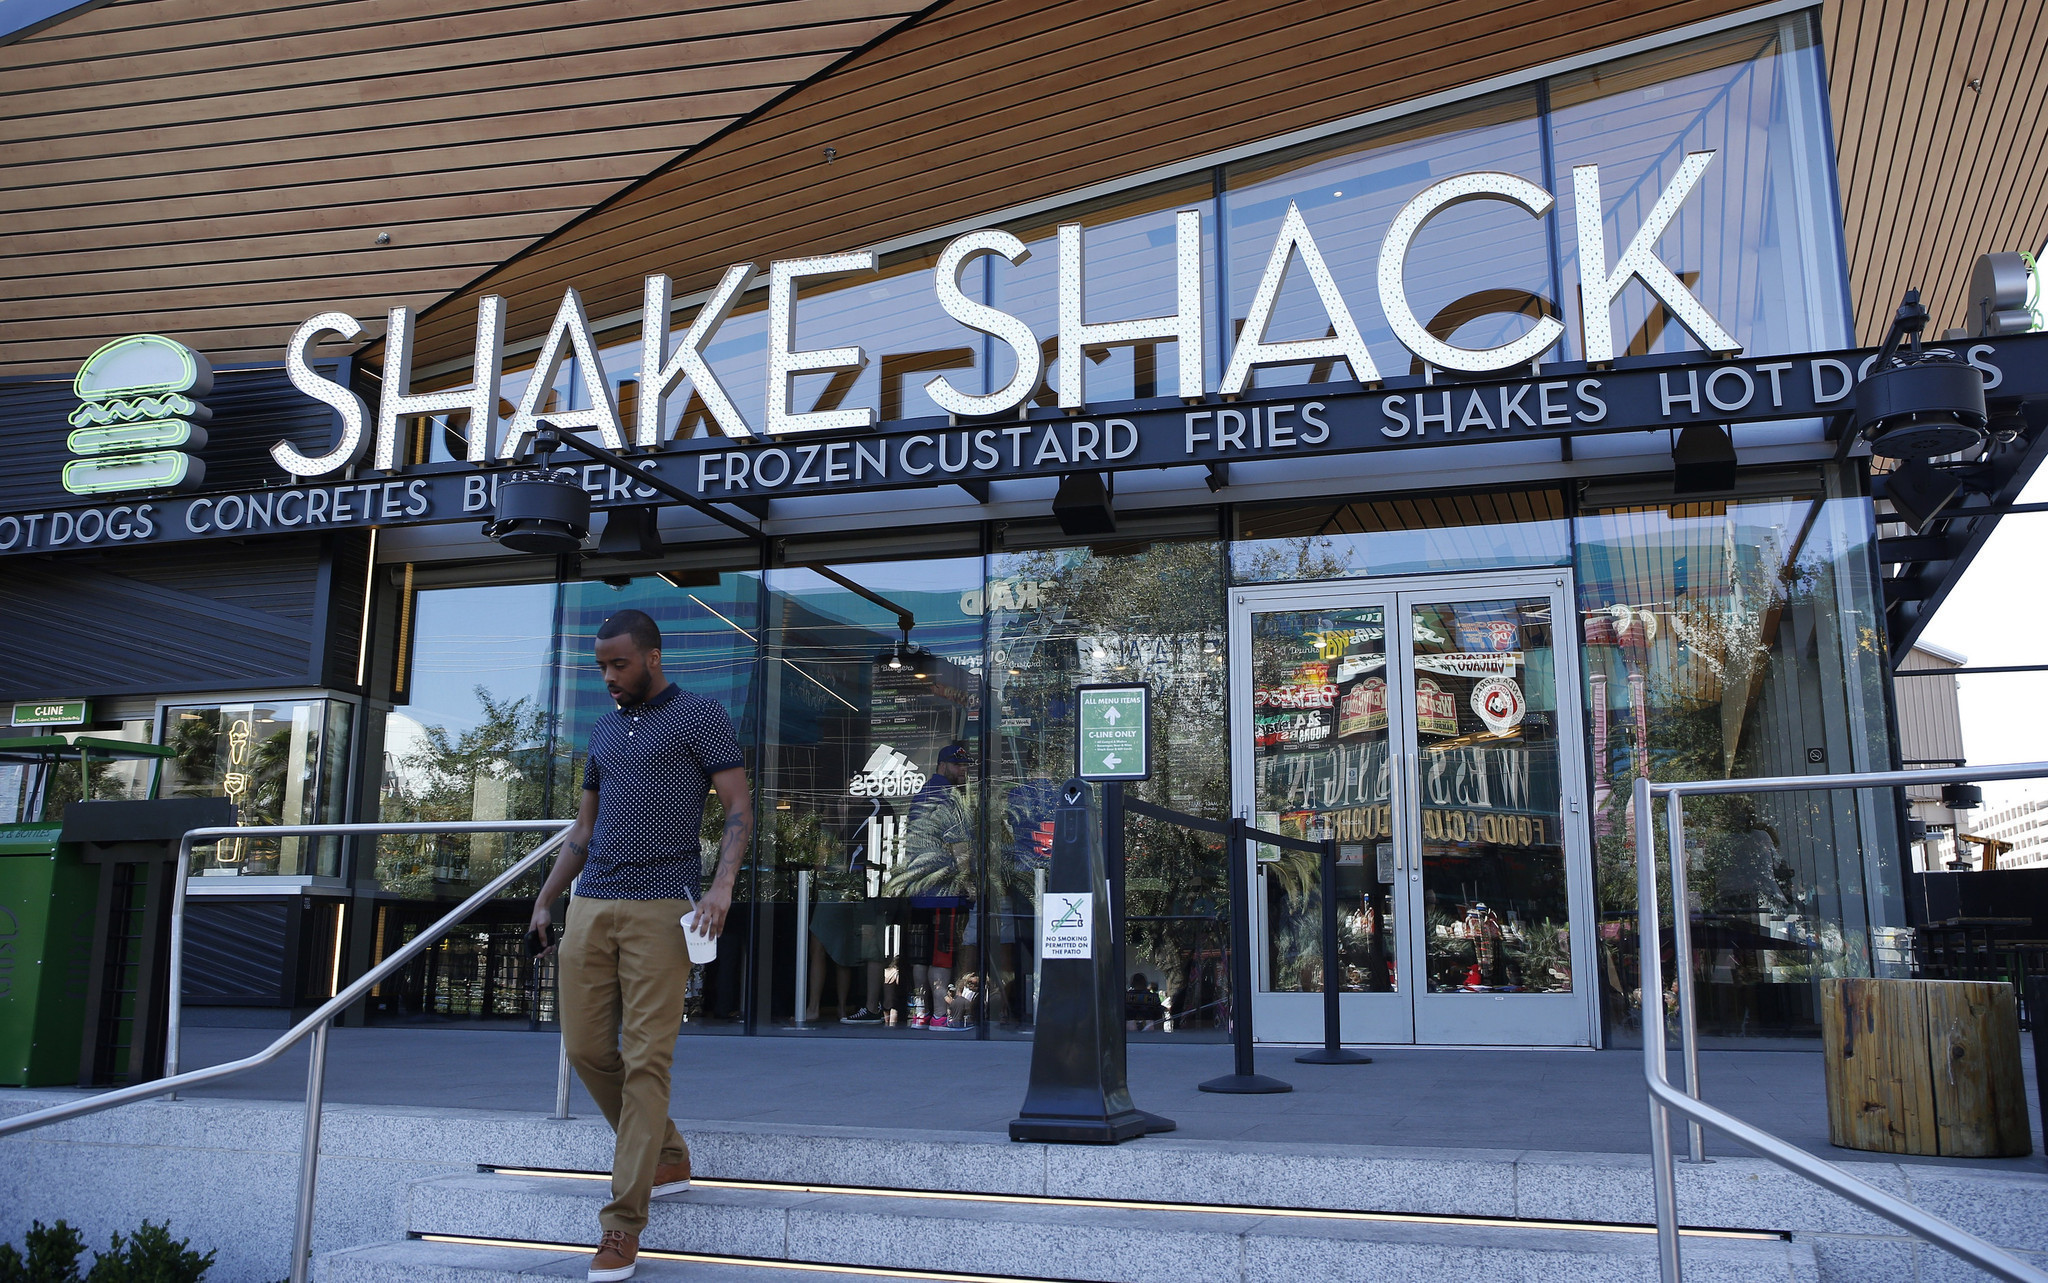 Shake Shack will open in West Hollywood next year